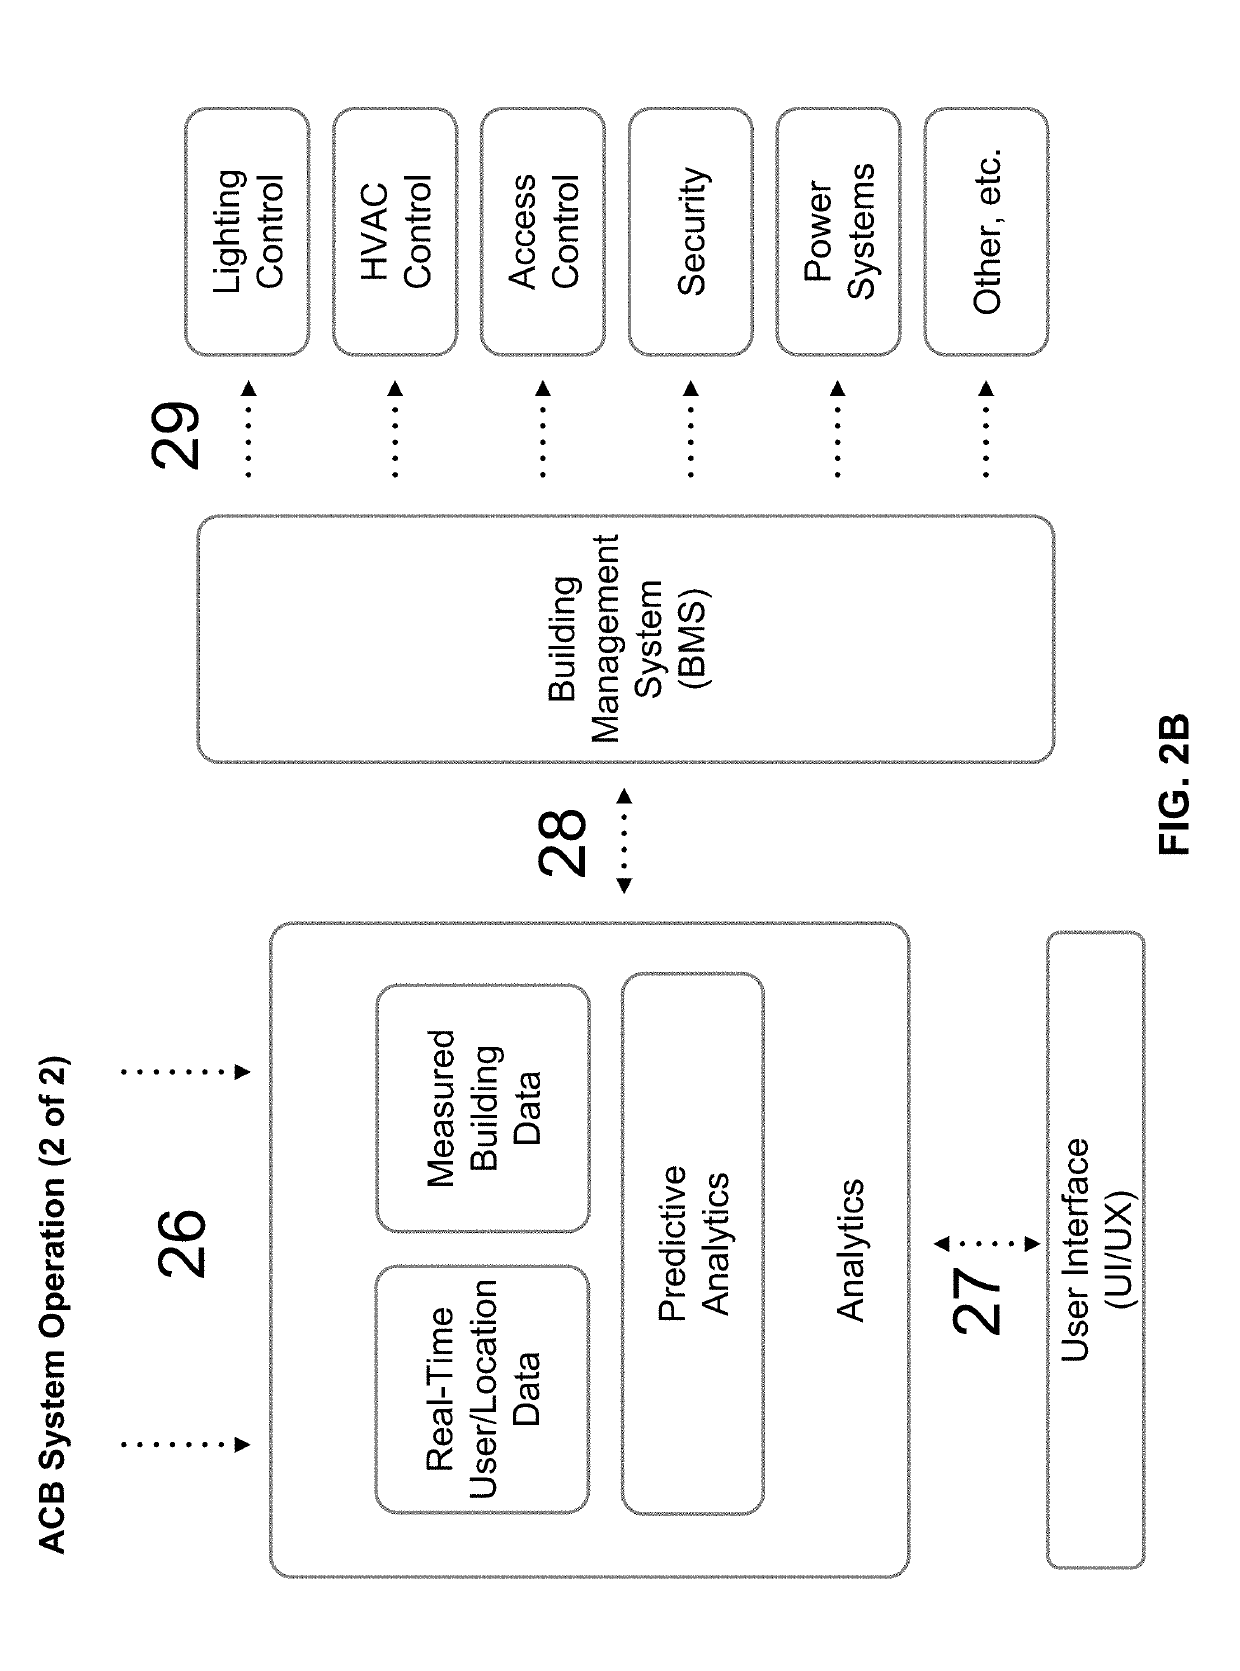 Systems and methods for beacon integrated with displays